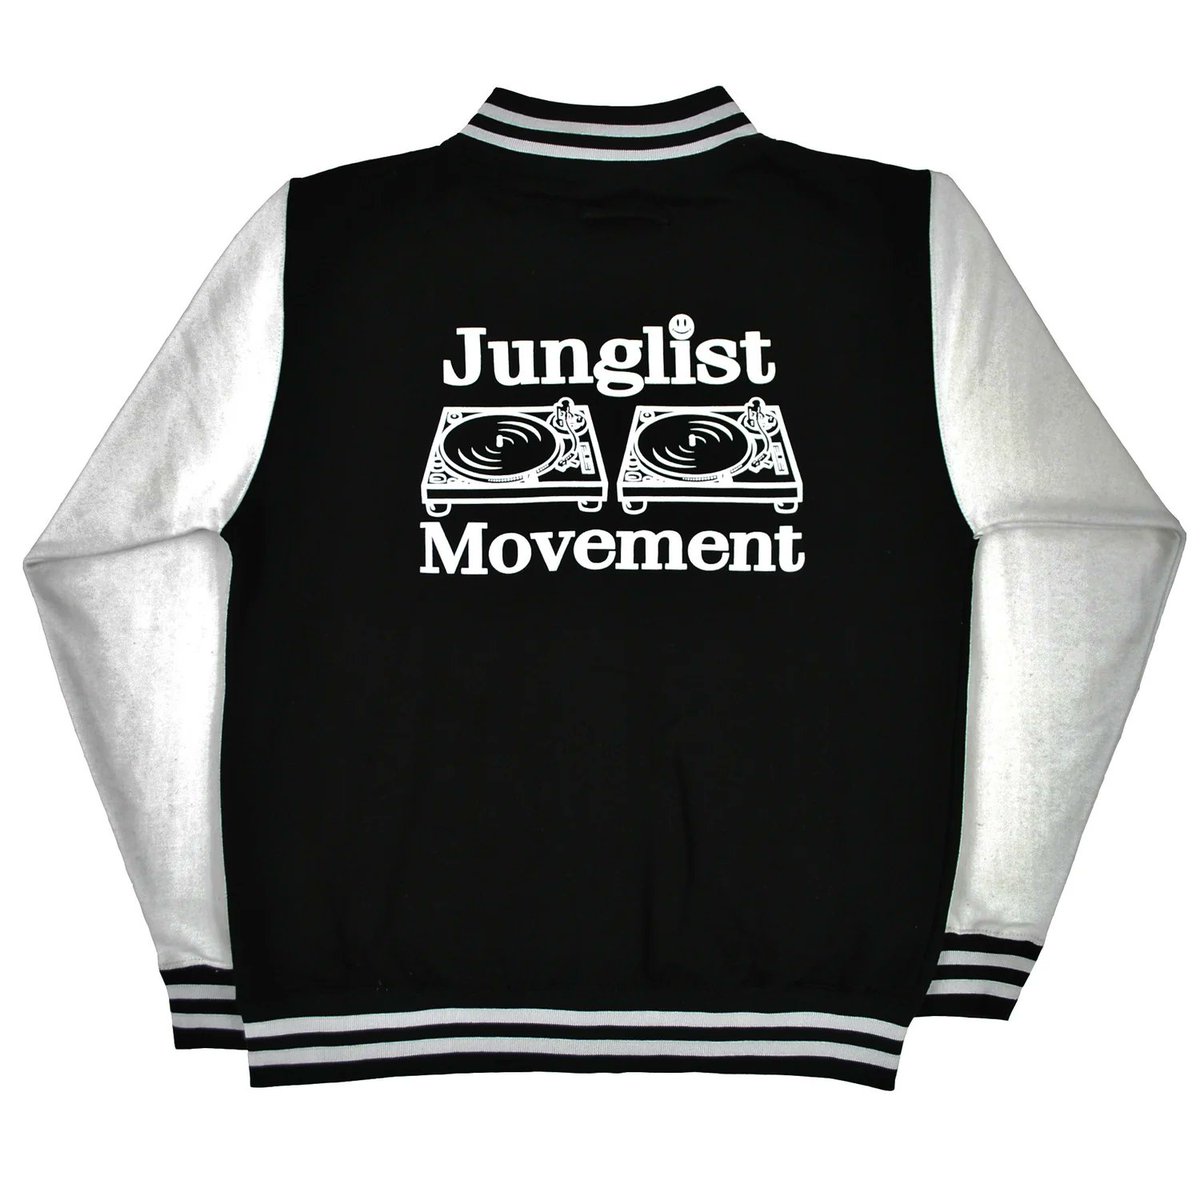 Elevate your street style with the Junglist Movement Princeton Varsity Jacket in Black/White 🖤- £75.00. 

Modelled by The Jungle Don A.K.A @DJRon_Film . Available in sizes S to 2XL. 🧥🎵

aerosoul.co.uk/products/aeros…

 #AerosoulFashion #JunglistVarsity #DJRonDesign #Streetwear